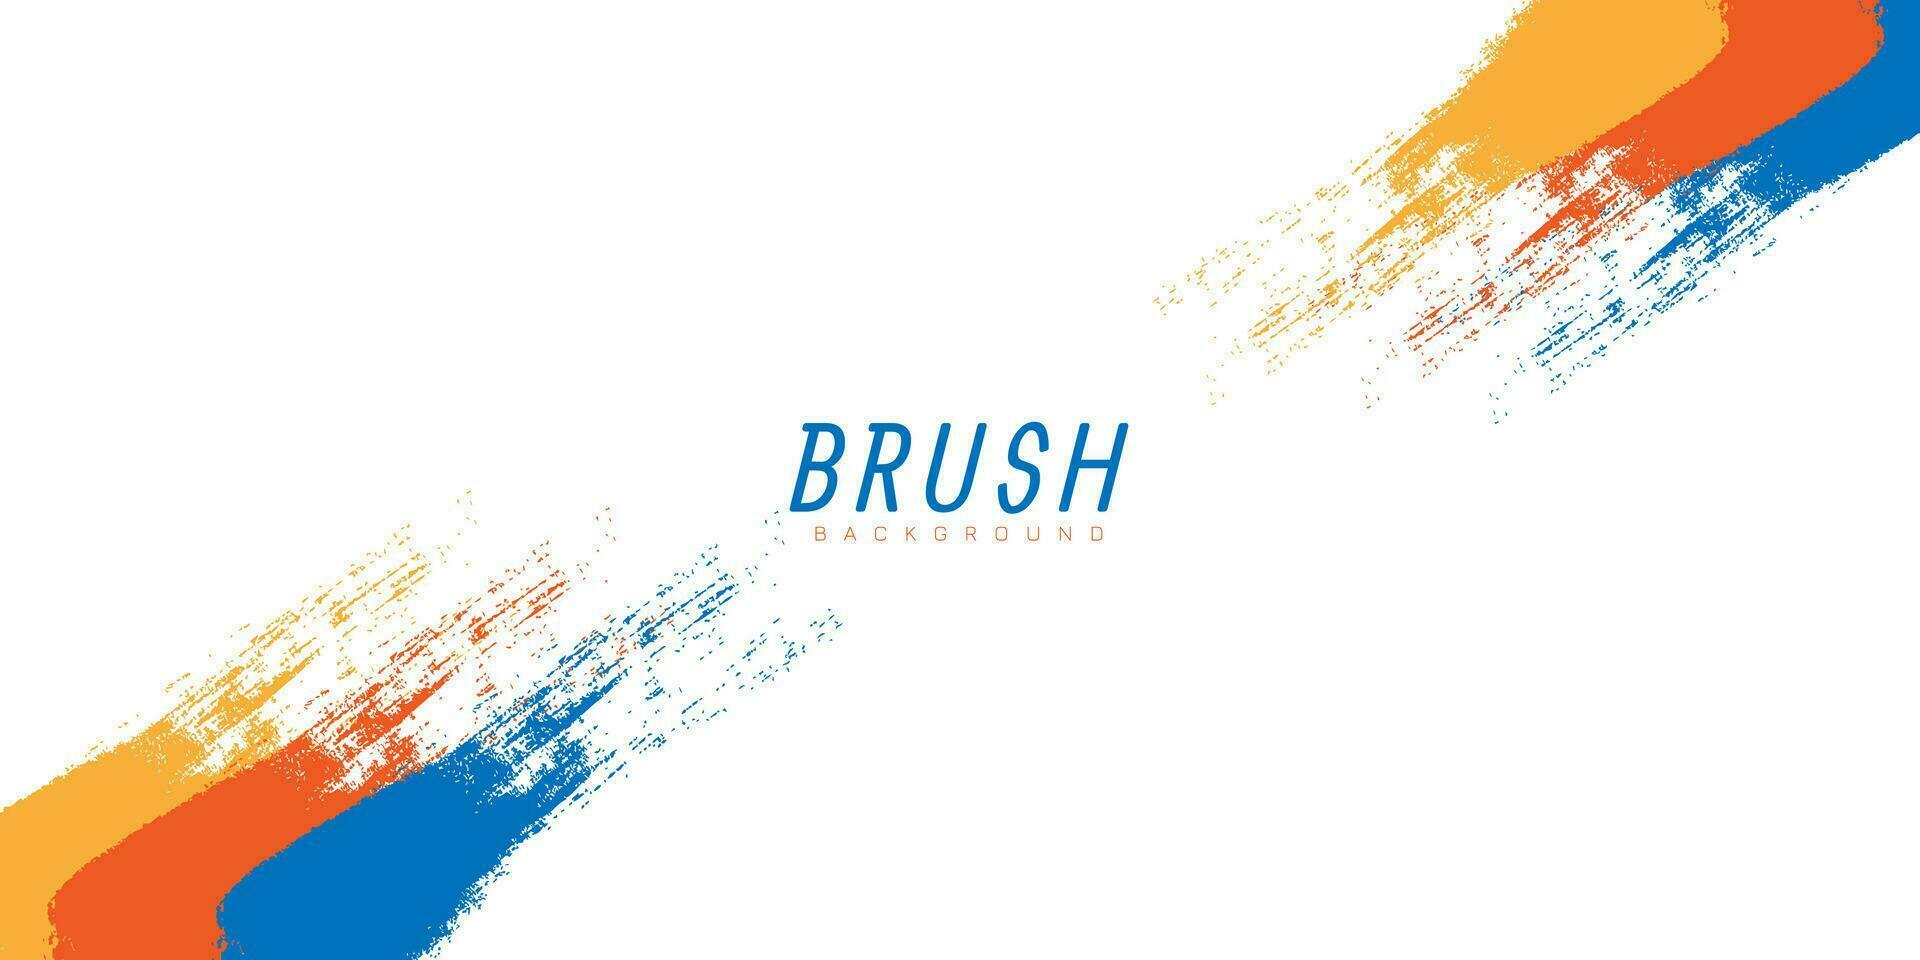 Abstract and Vector Brush Background with Colorful Brush Strokes